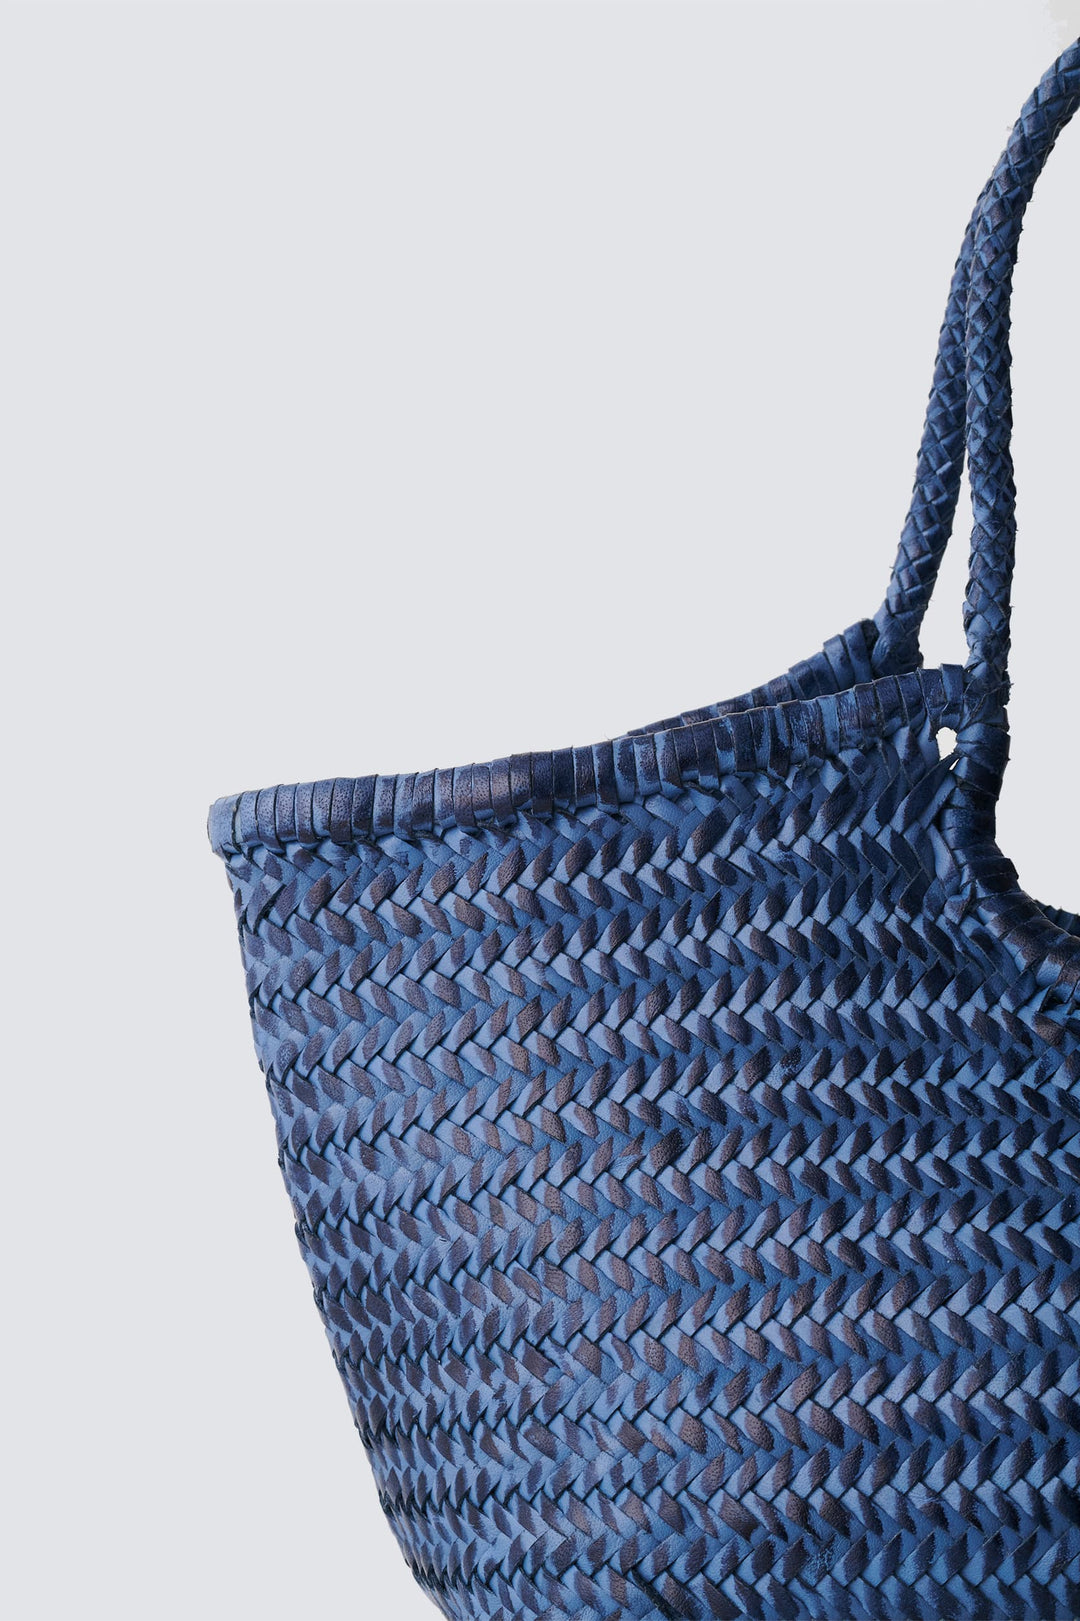 Nantucket large woven leather tote